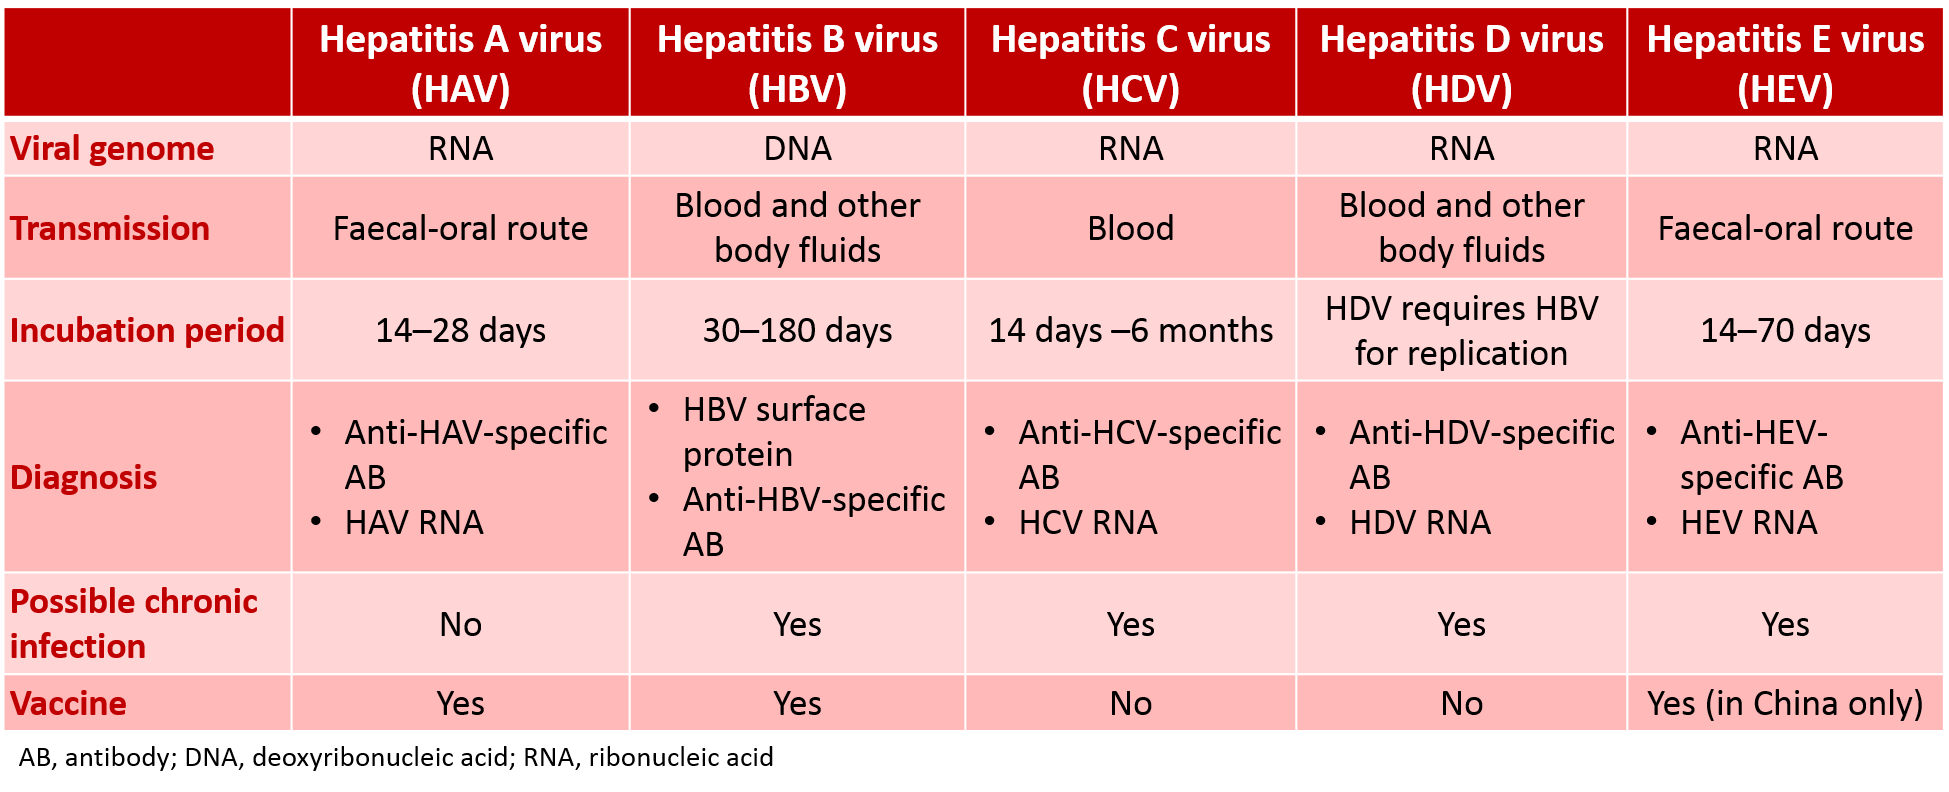 Scaling Up Screening And Treatment For Elimination Of Hepatitis C Among Men Who Have Sex With Men In The Era Of Hiv Pre